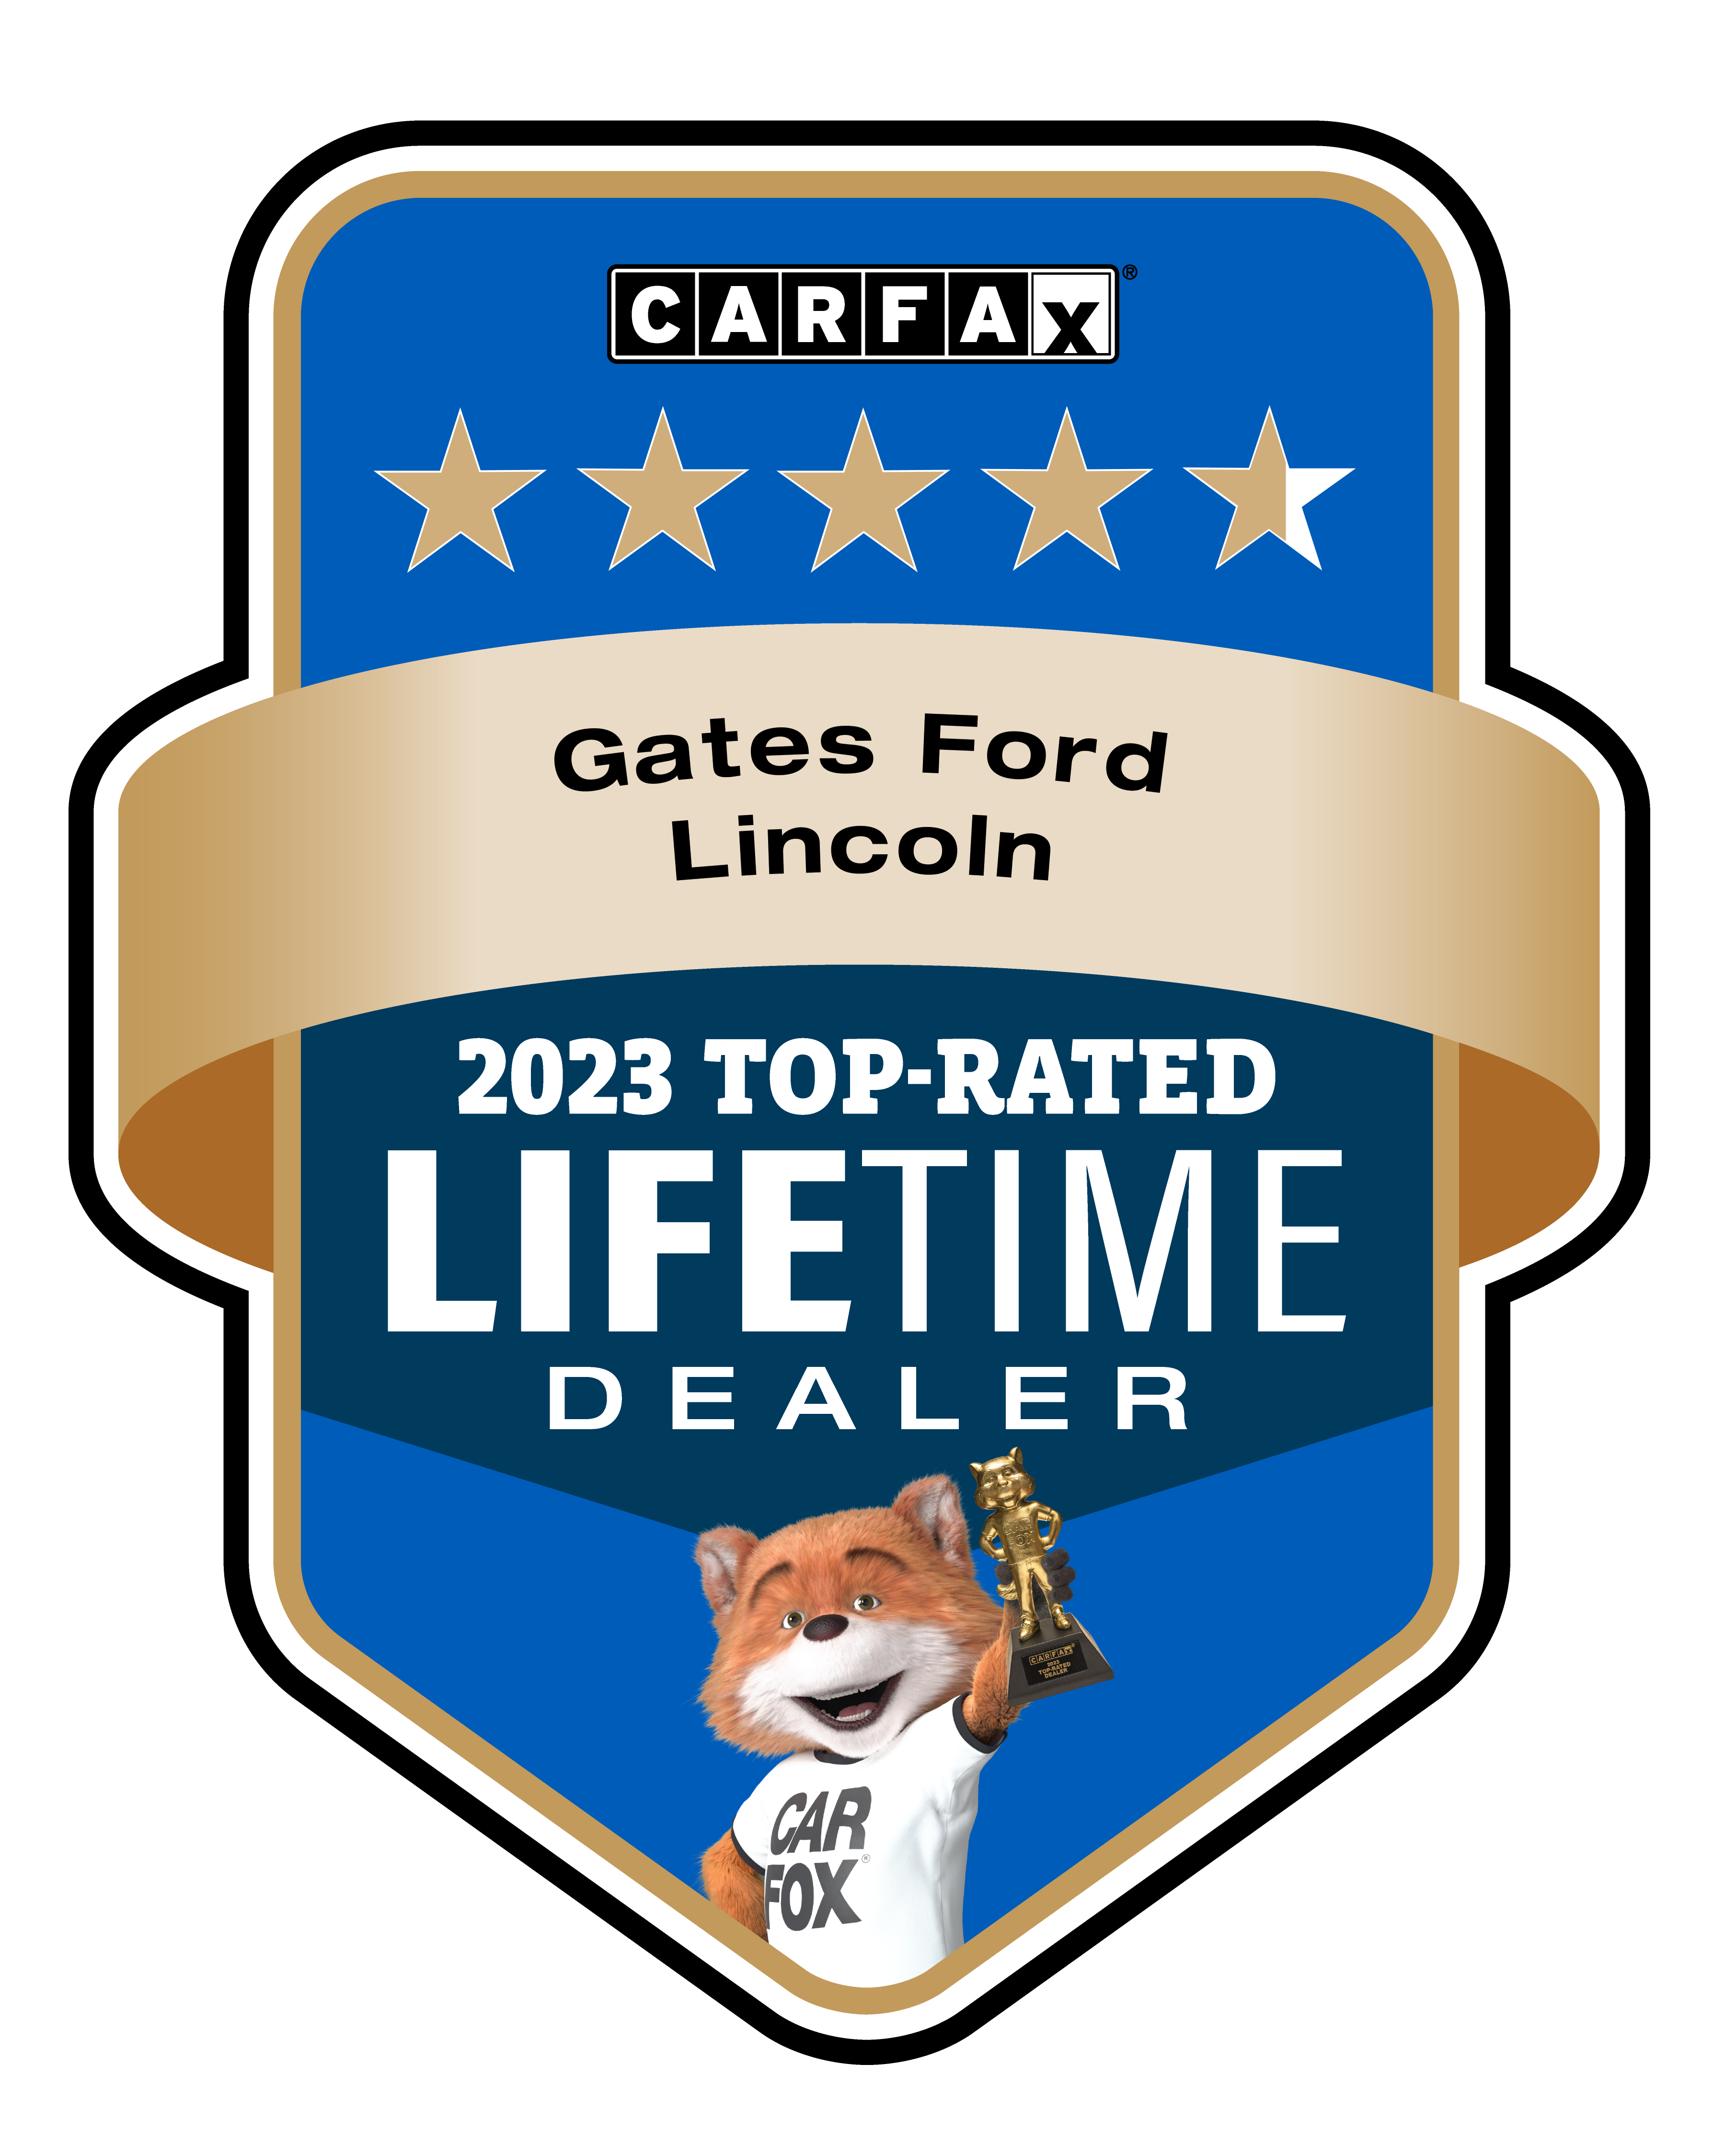 Gates Ford Lincoln